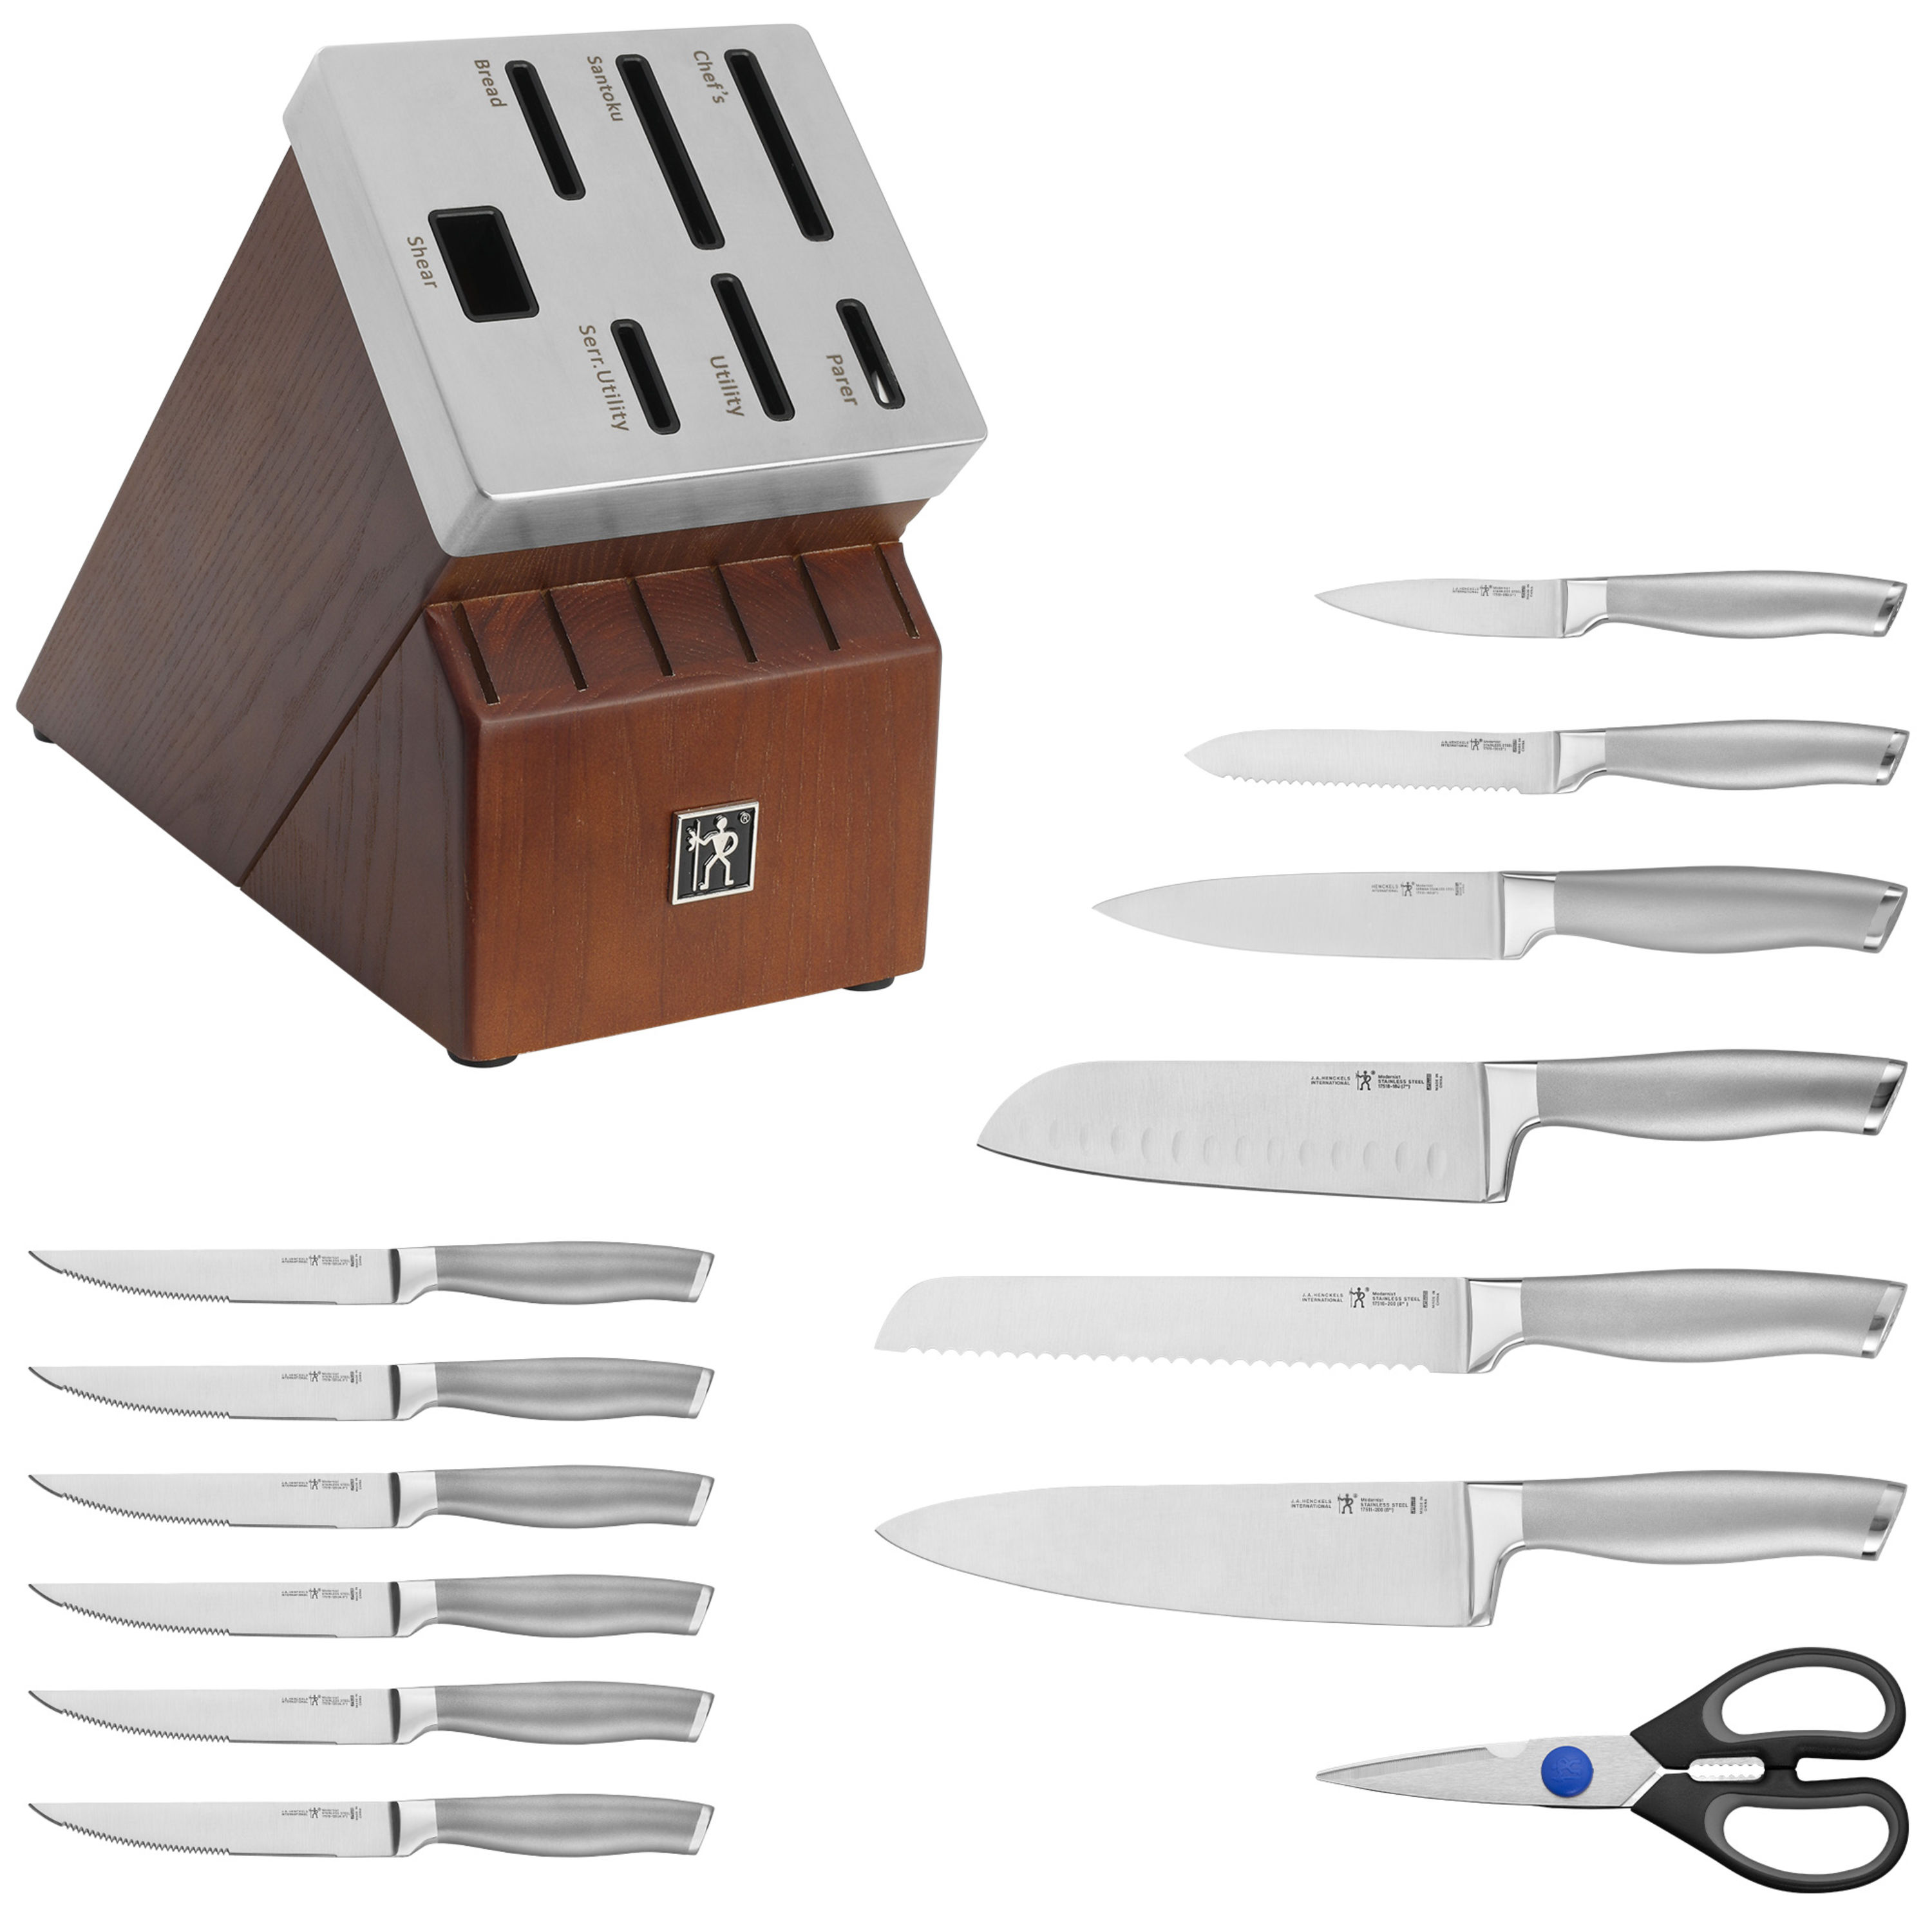 https://www.zwilling.com/on/demandware.static/-/Sites-zwilling-master-catalog/default/dw5aad835a/images/large/17503-014_01.jpg